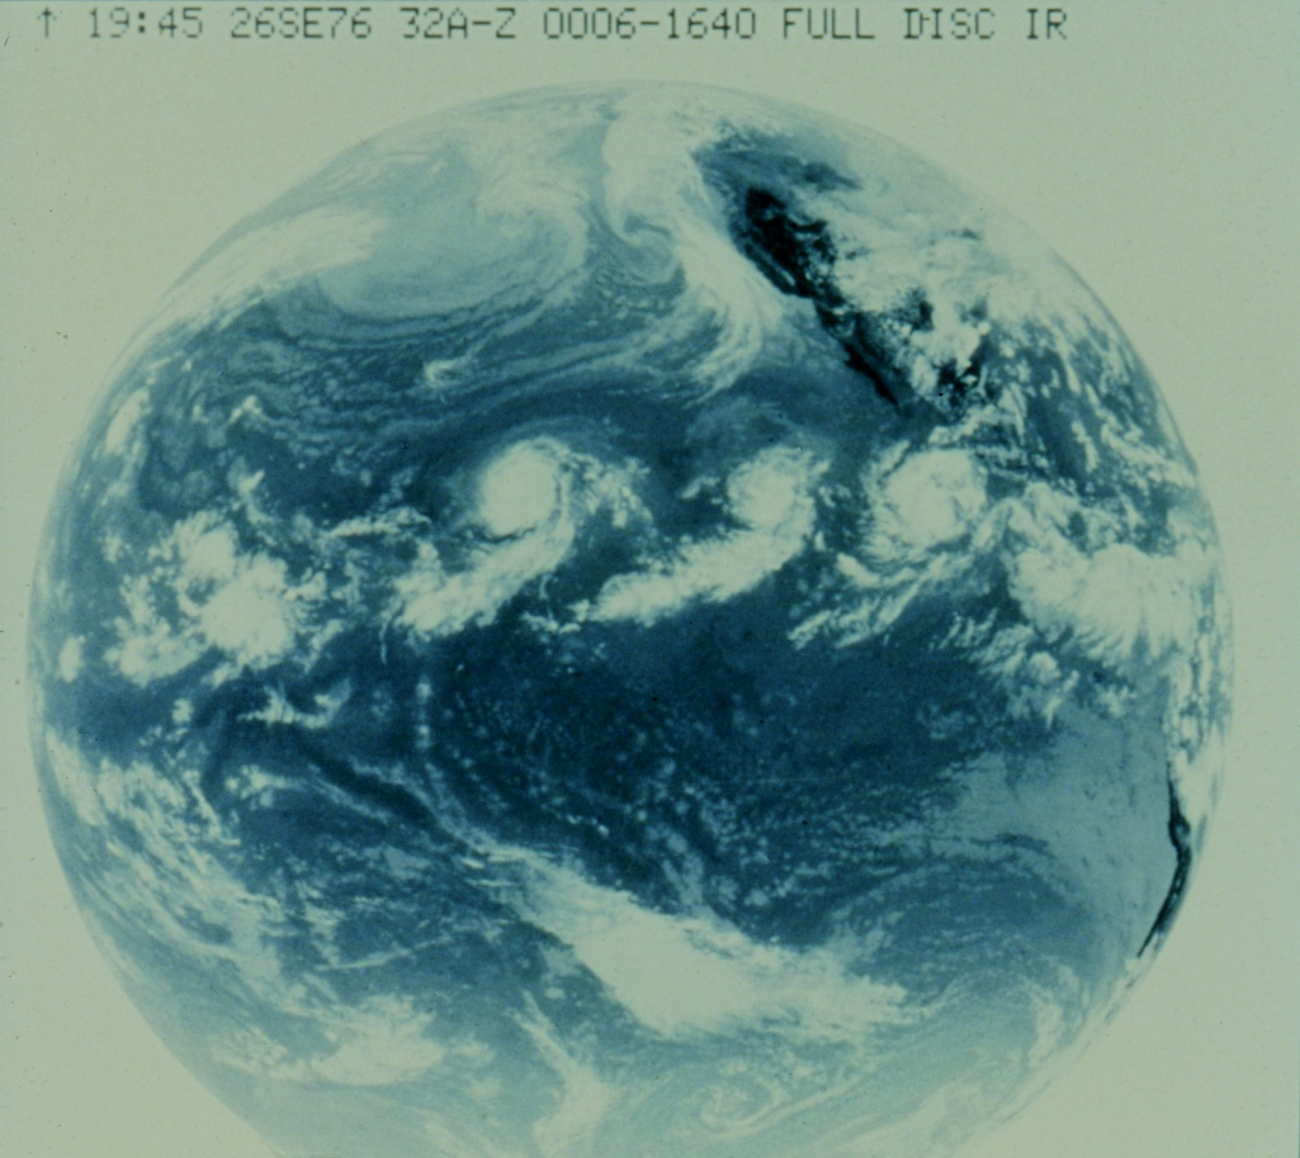 SMS-II full disc infrared image showing parade of tropical storms marching tothe west across the eastern Pacific Ocean